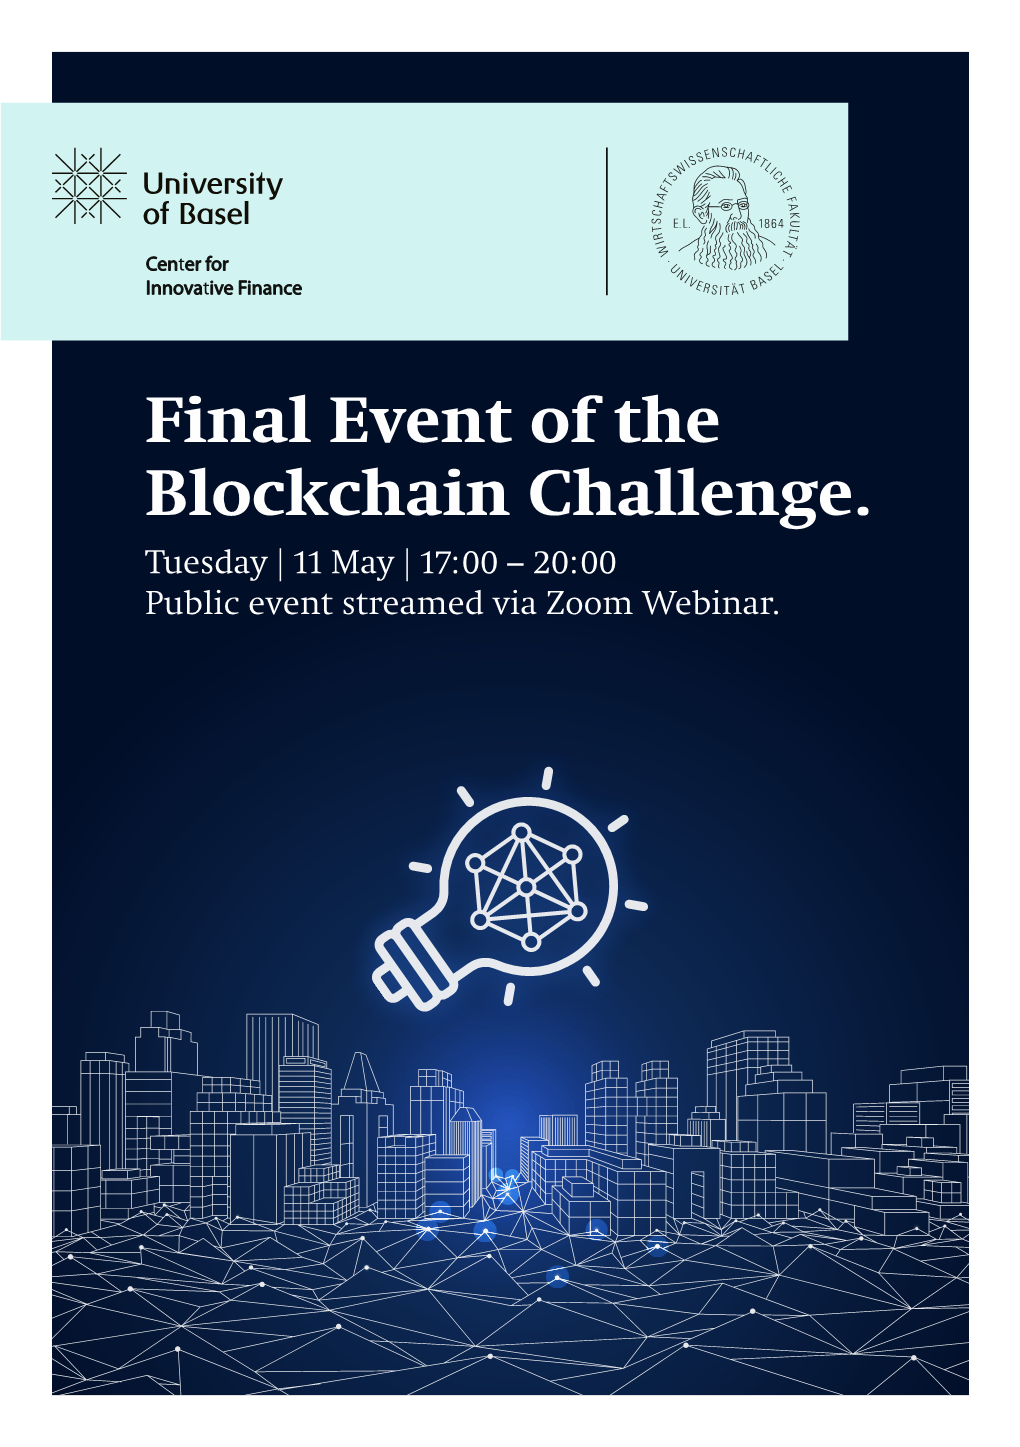 Final Event of the Blockchain Challenge. Tuesday | 11 May | 17: 00 – 20: 00 Public Event Streamed Via Zoom Webinar